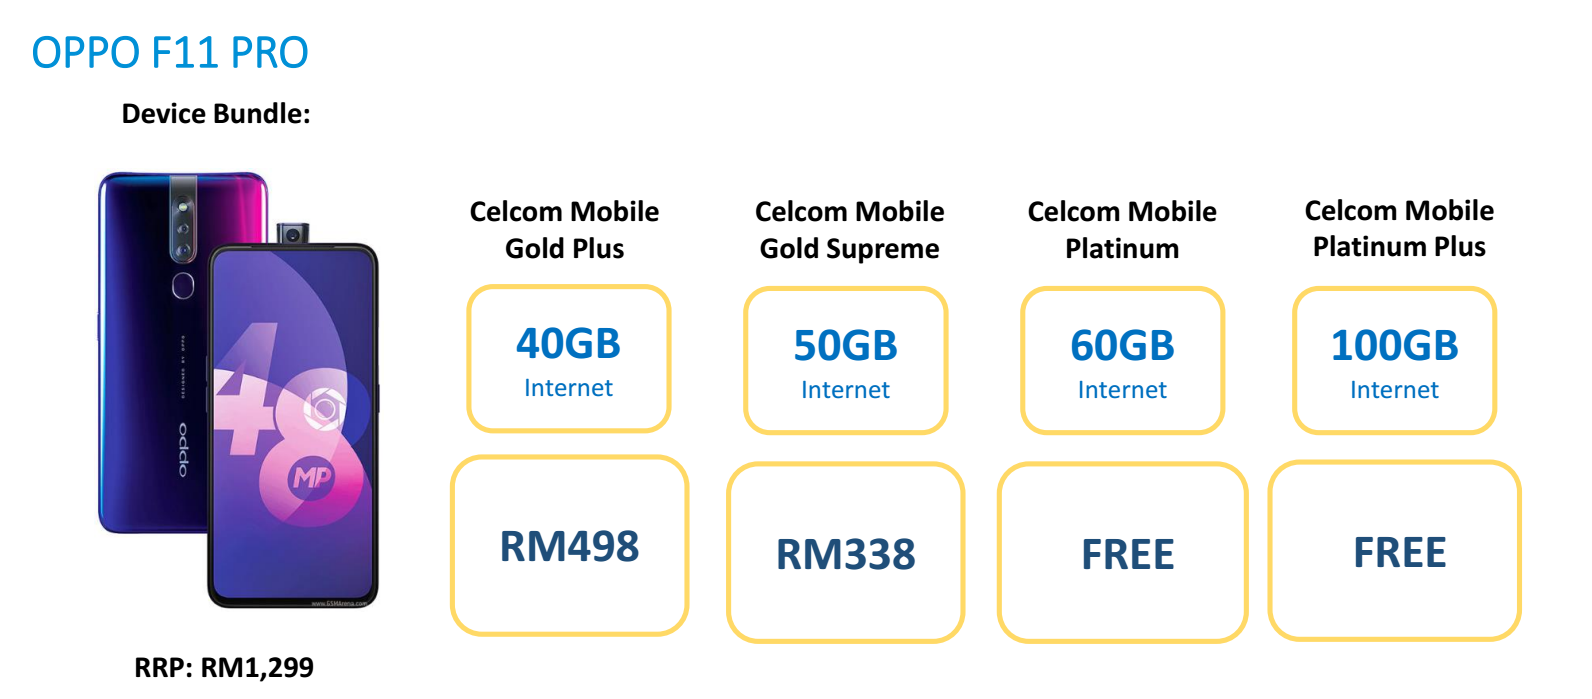 Subscribe To Selected Celcom Post Paid Plans And Receive A Free Oppo F11 Pro